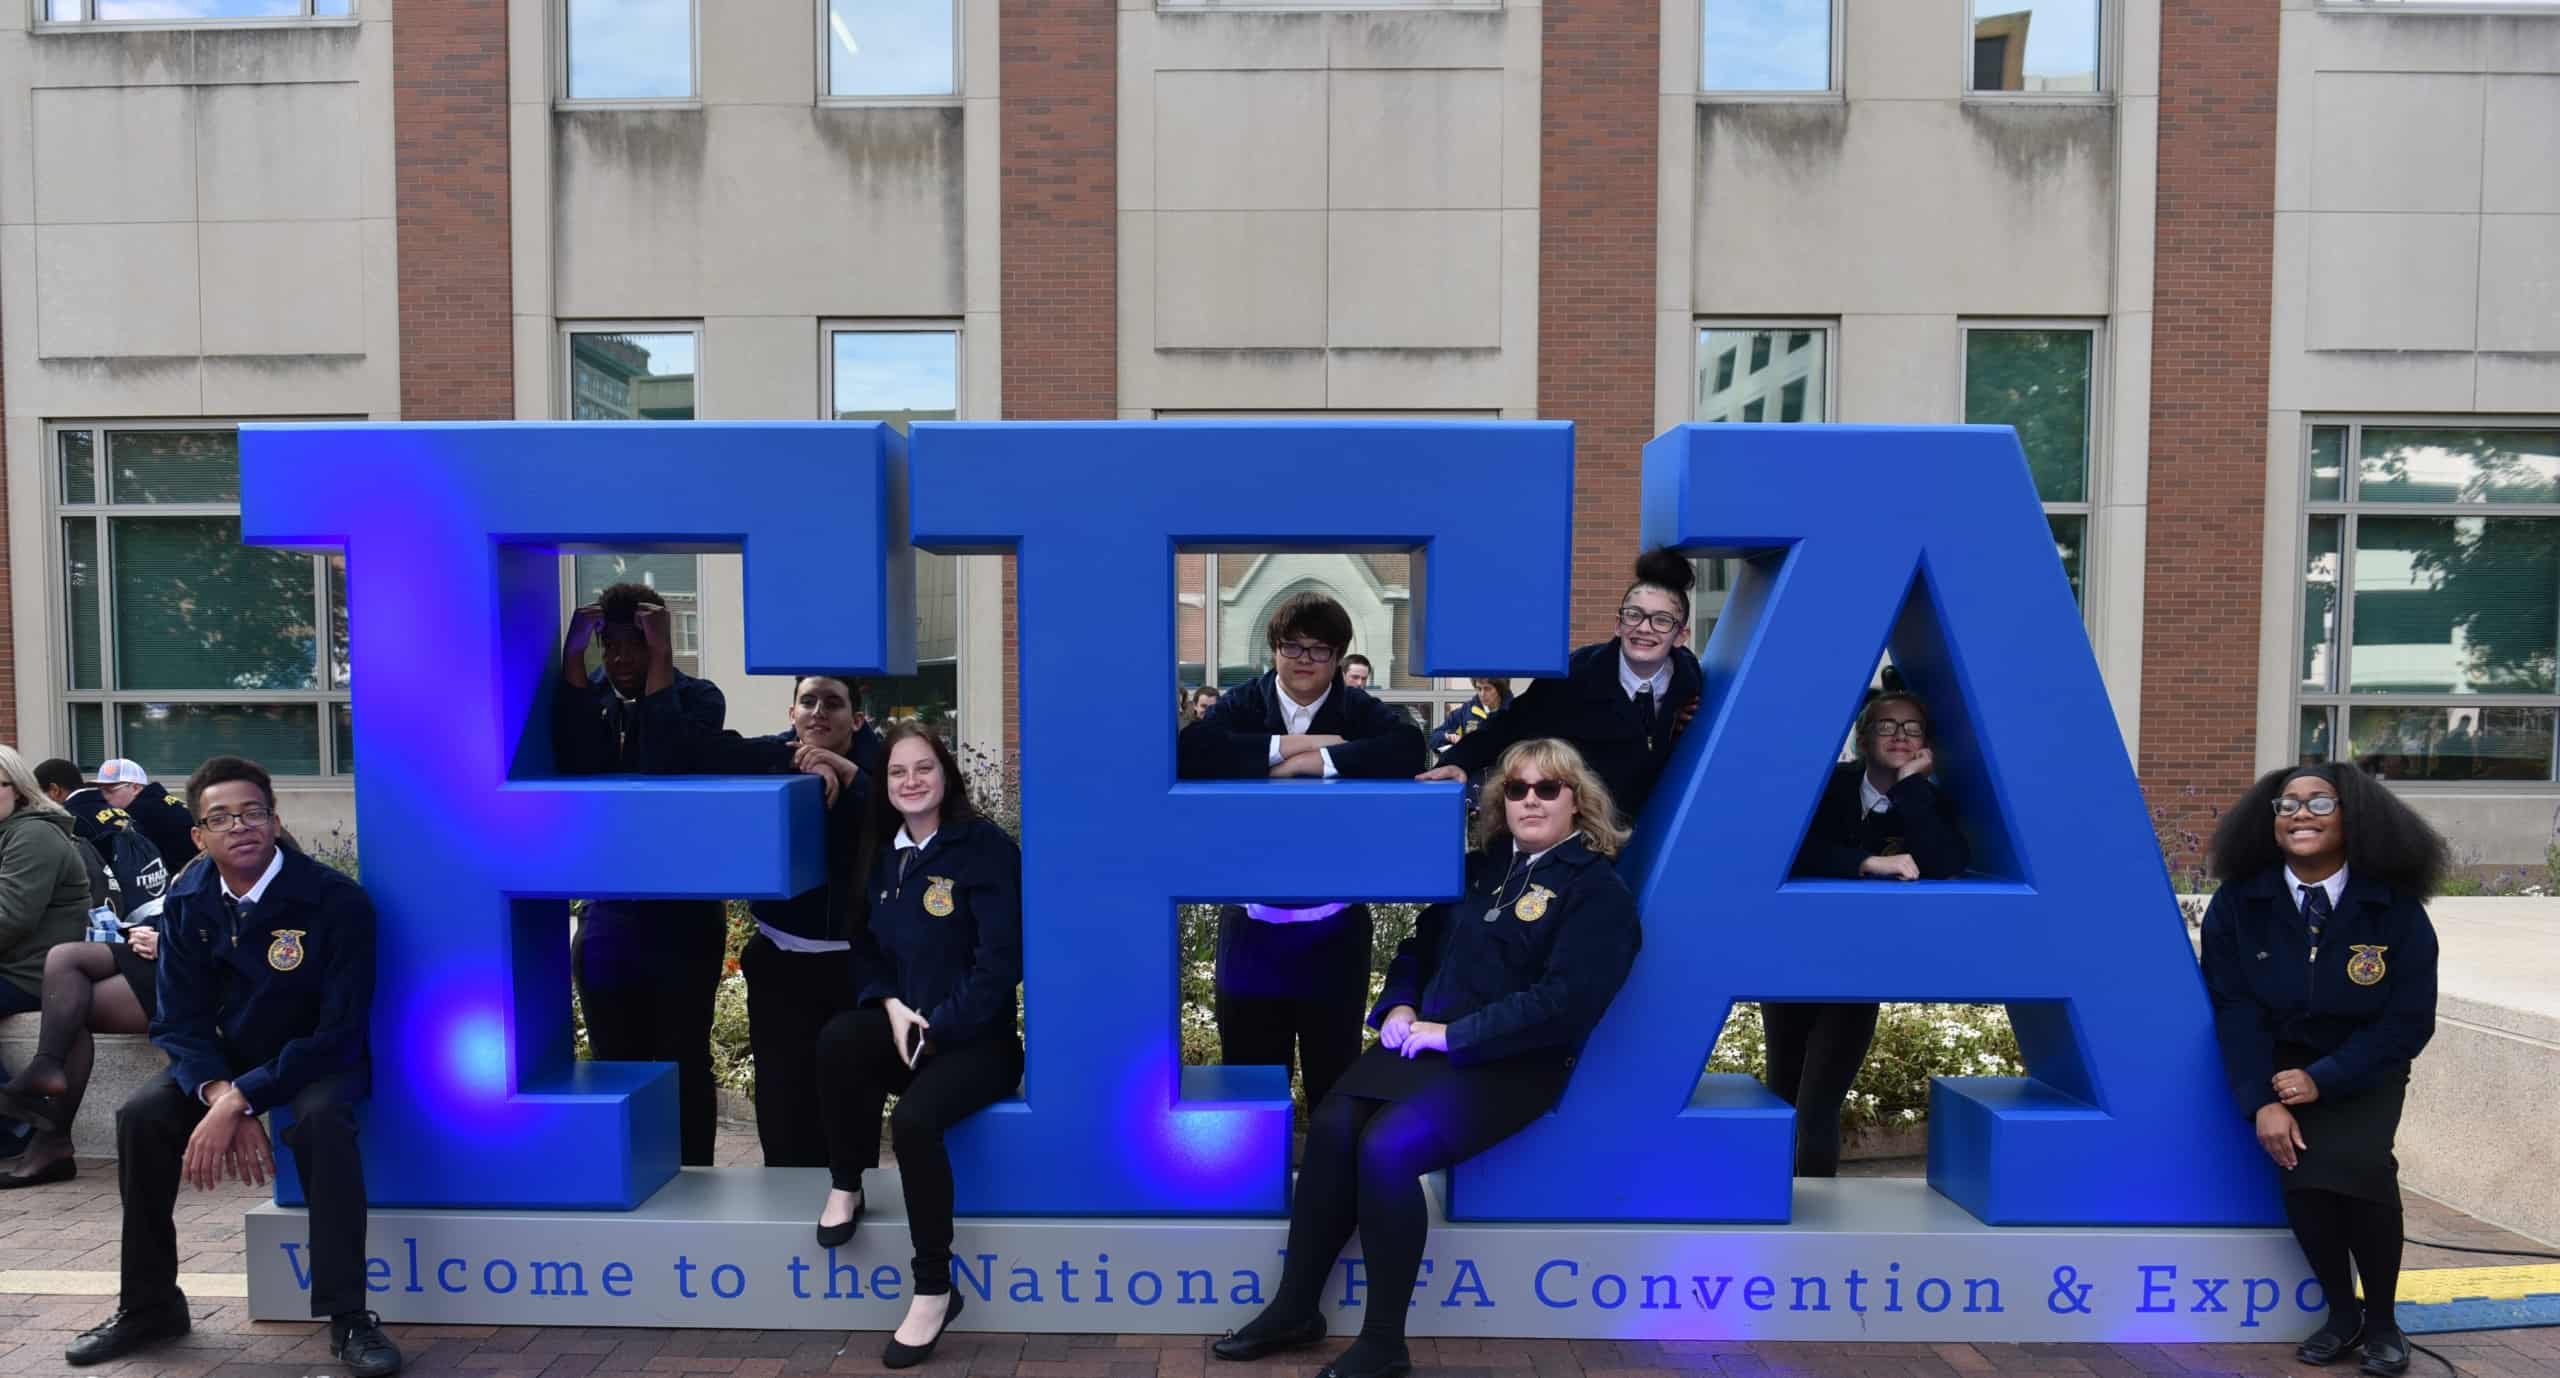 94th National FFA Convention & Expo Southeast Center for Agricultural  Health and Injury Prevention, Ffa